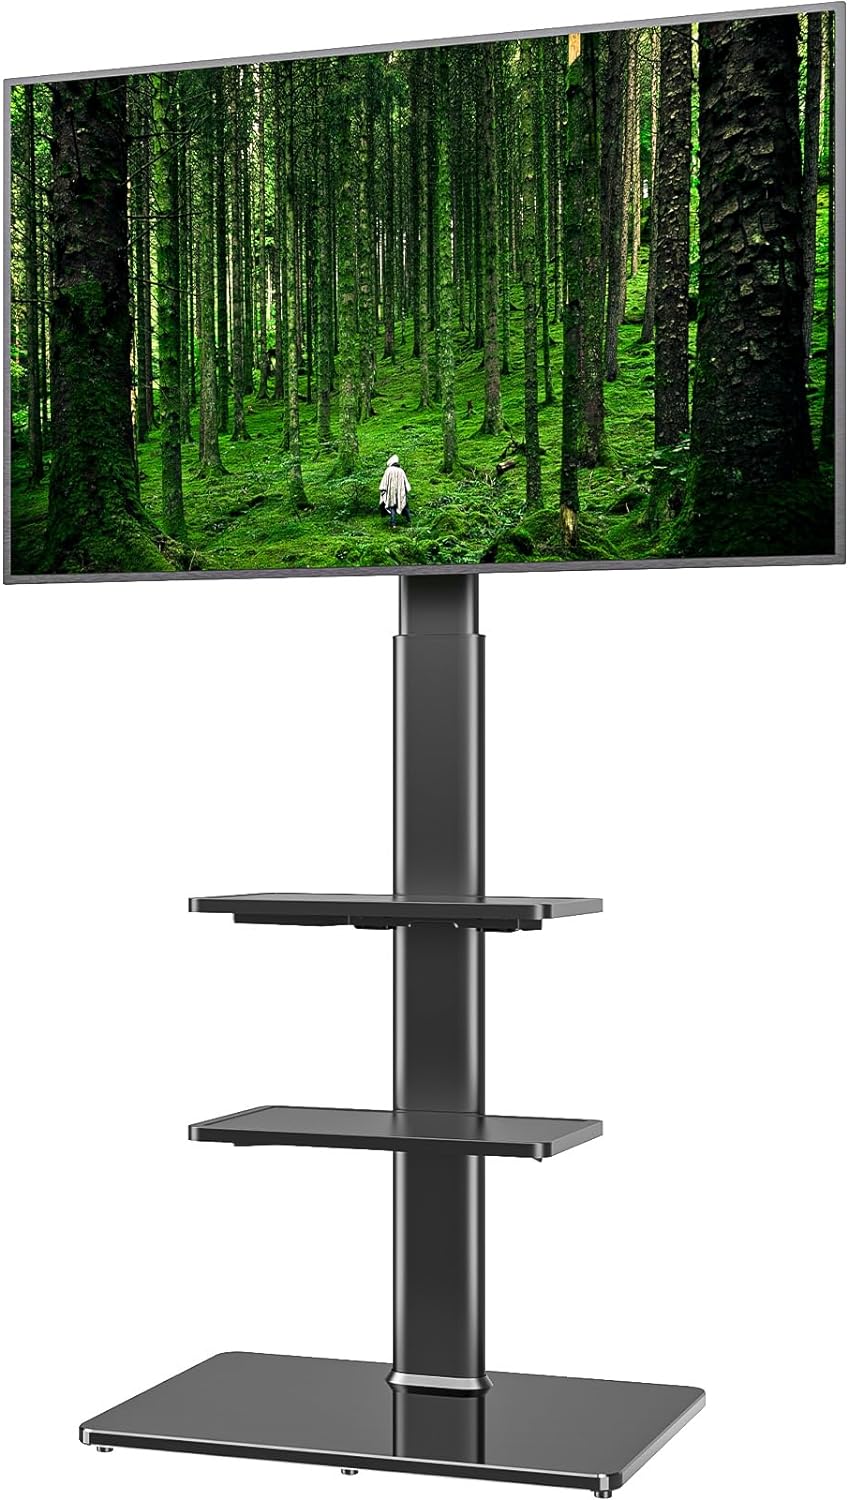 Universal Floor TV Stand with Mount for 19 to 43 inch Flat Screen TV, 100 Degree Swivel,Adjustable Height and Tilt Function, 3 Shelves Space Saving Standing TV Mount for Bedroom Living Room Corner